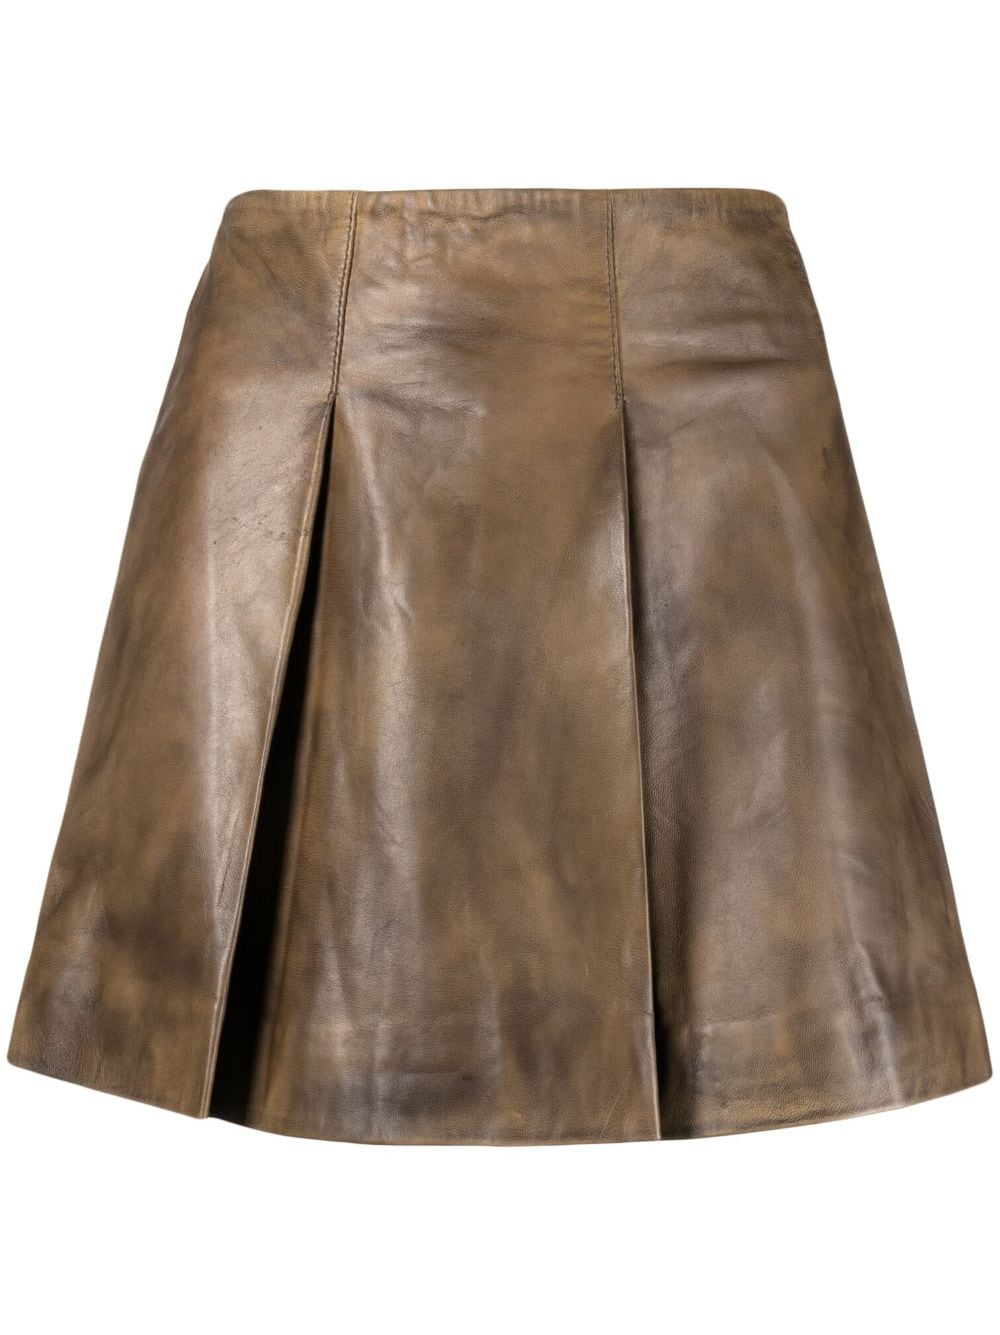 REMAIN pleated A-line leather miniskirt - Brown von REMAIN